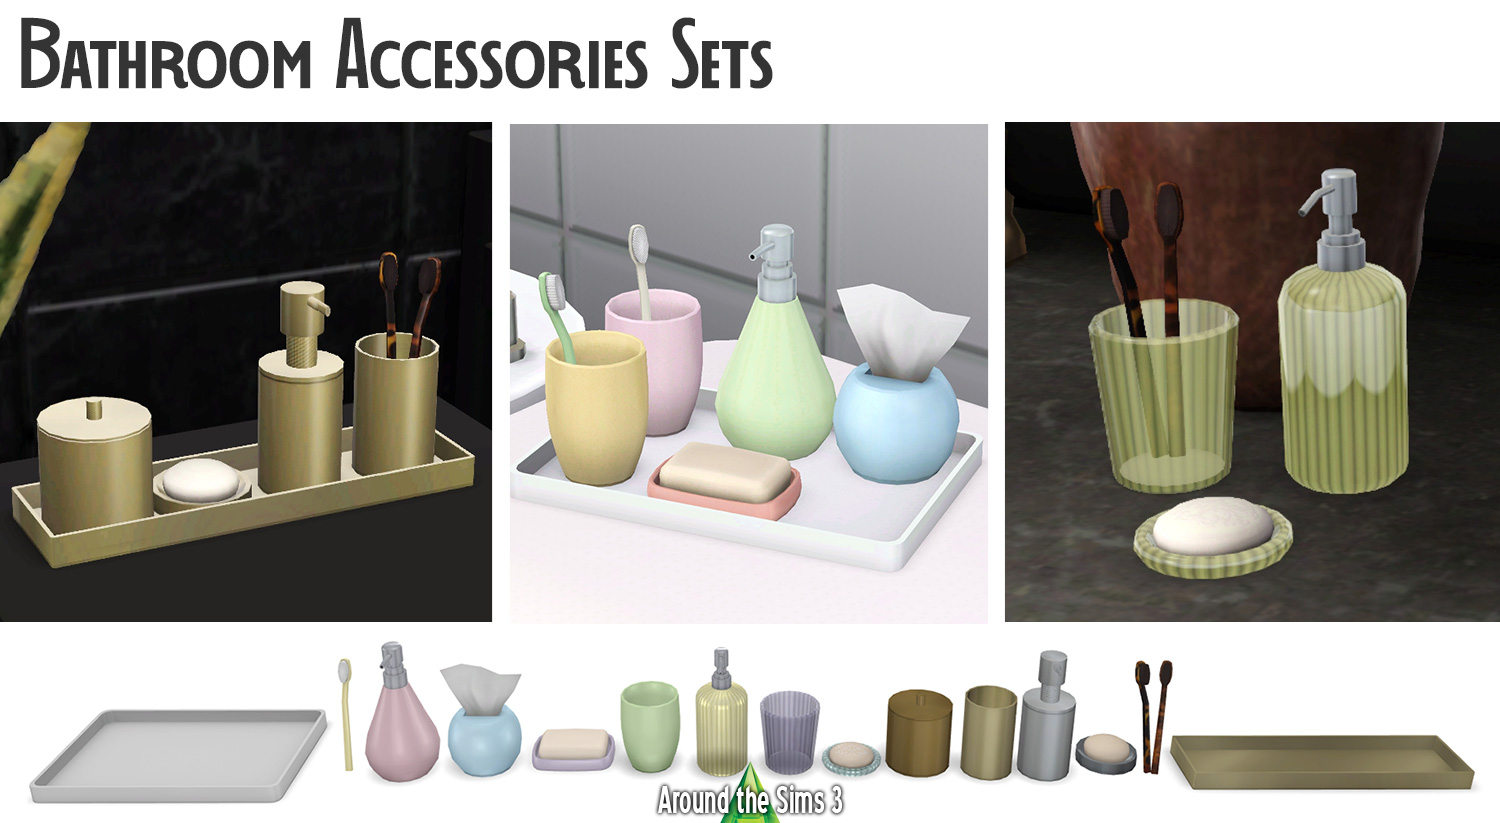 Around the Sims 3  Free Custom Content to Download for the Sims 3